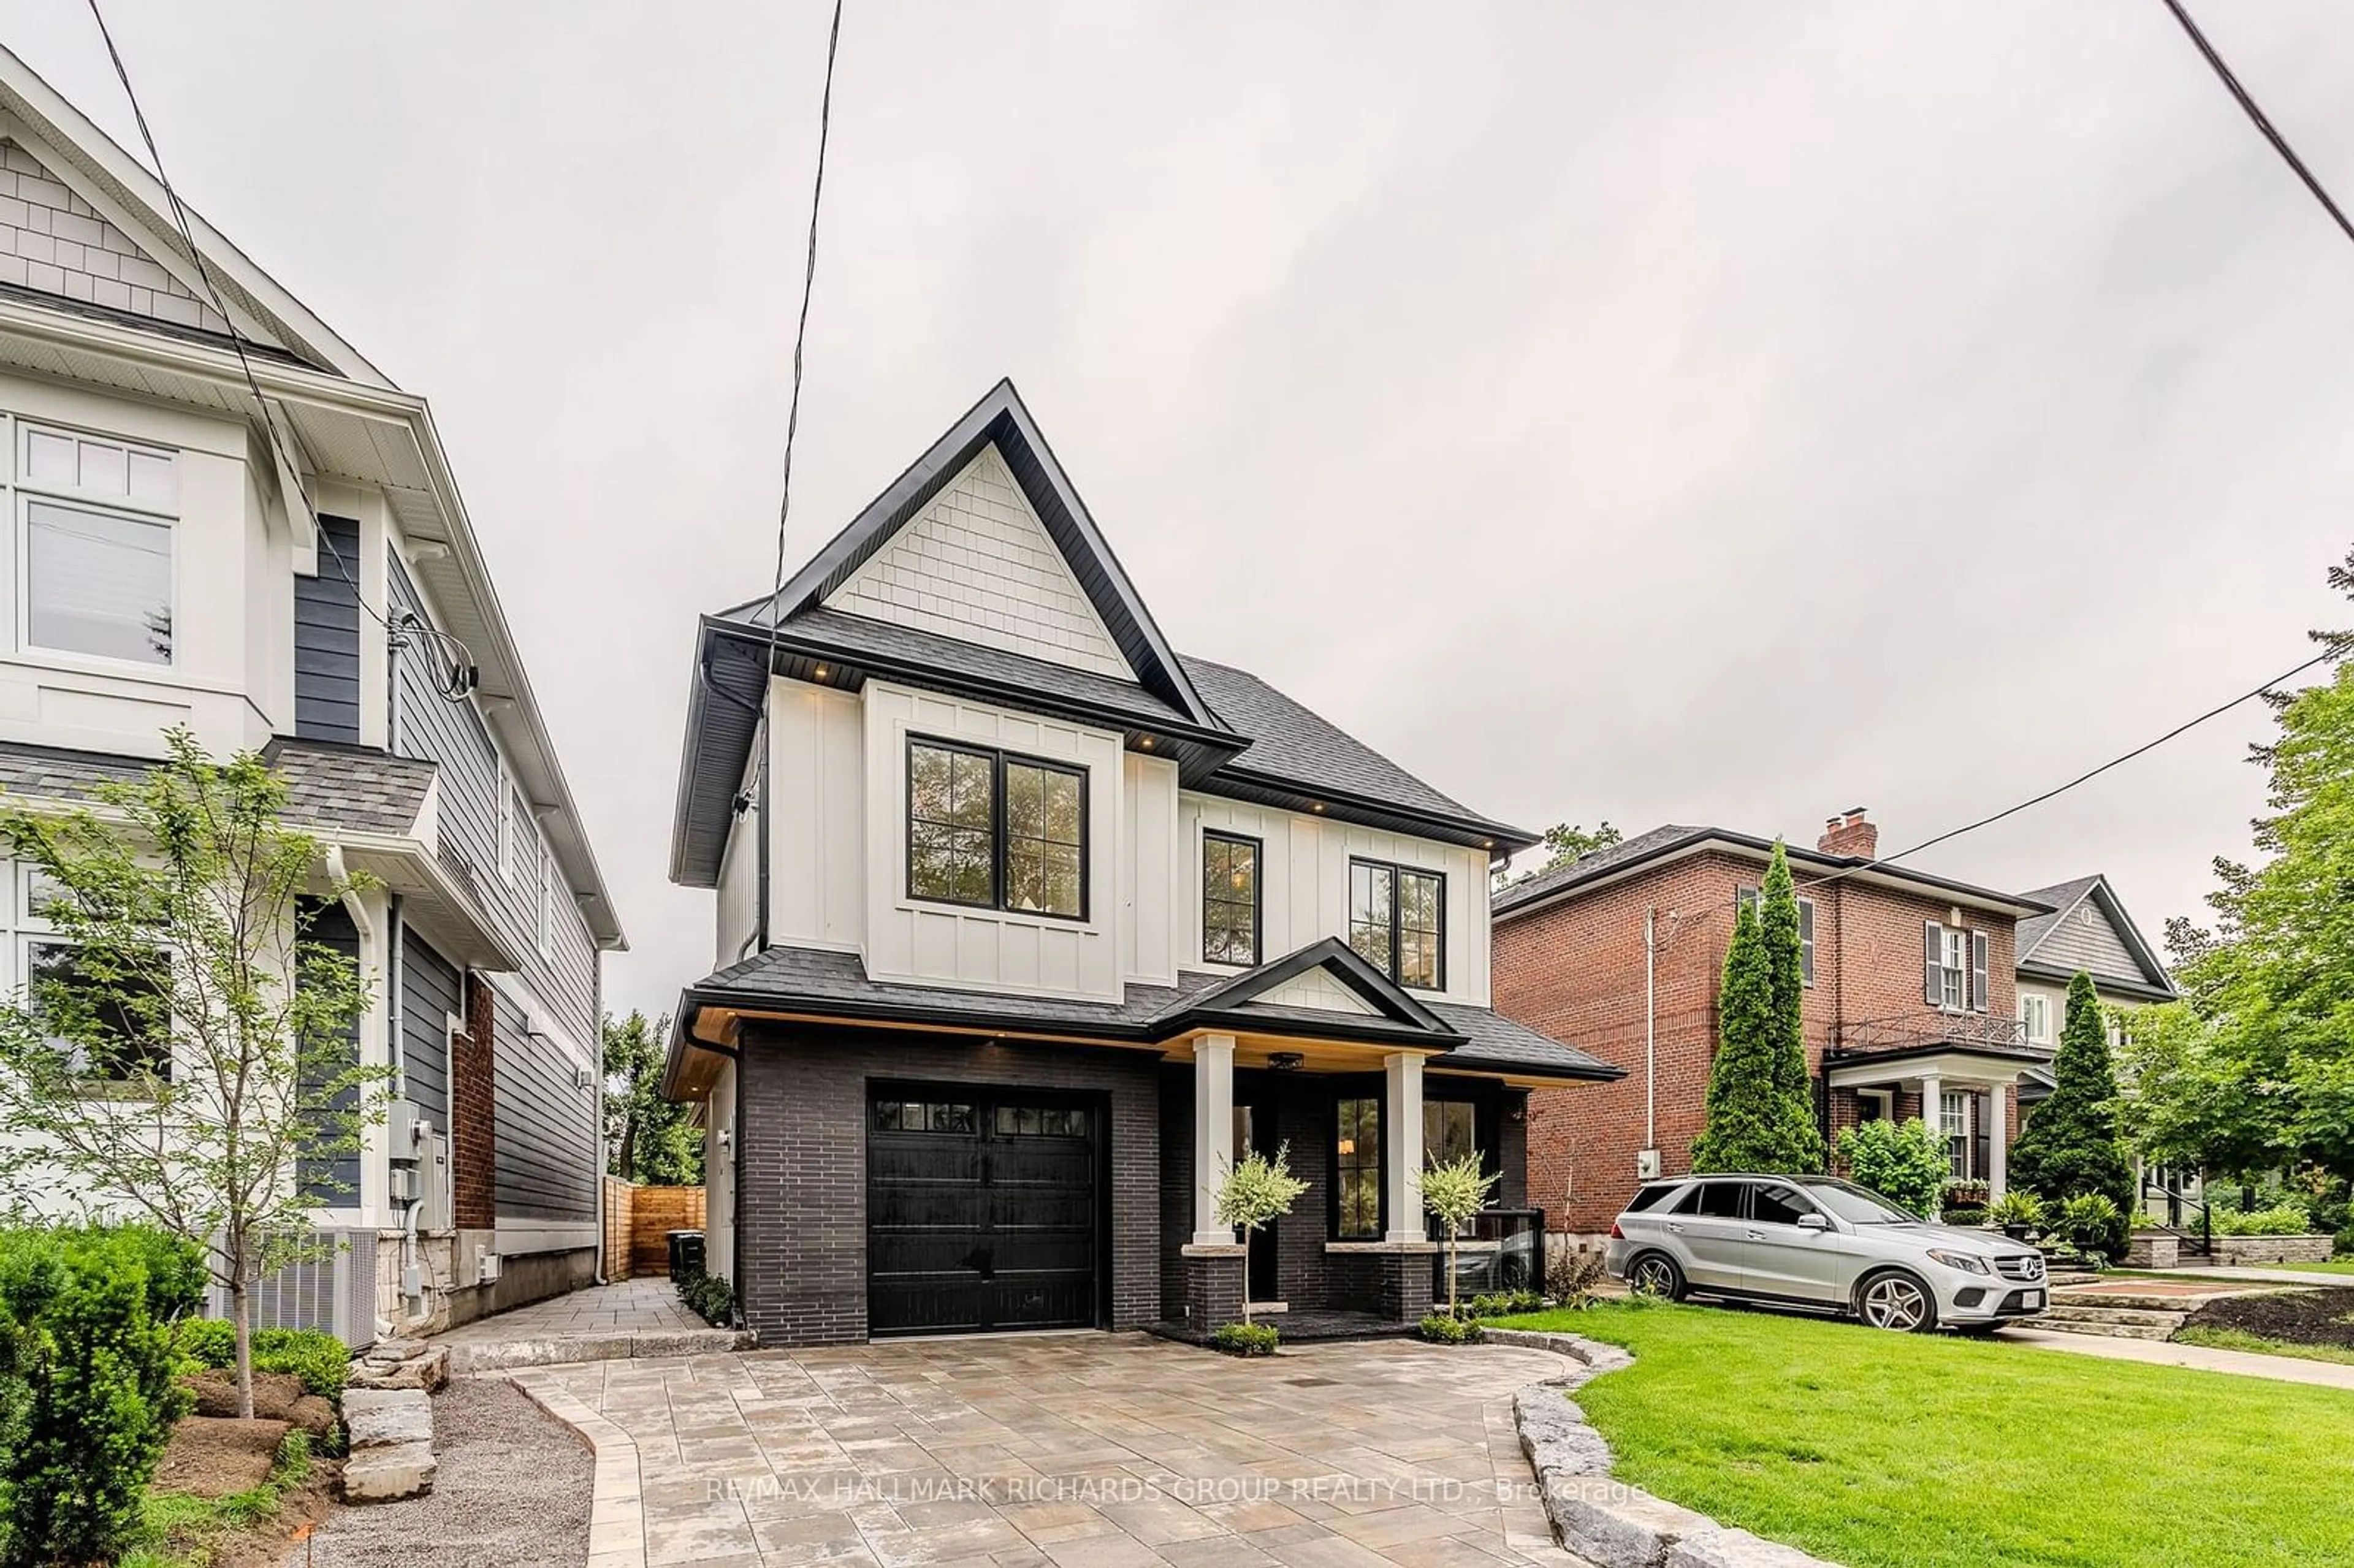 Home with brick exterior material for 33 Lynndale Rd, Toronto Ontario M1N 1B9